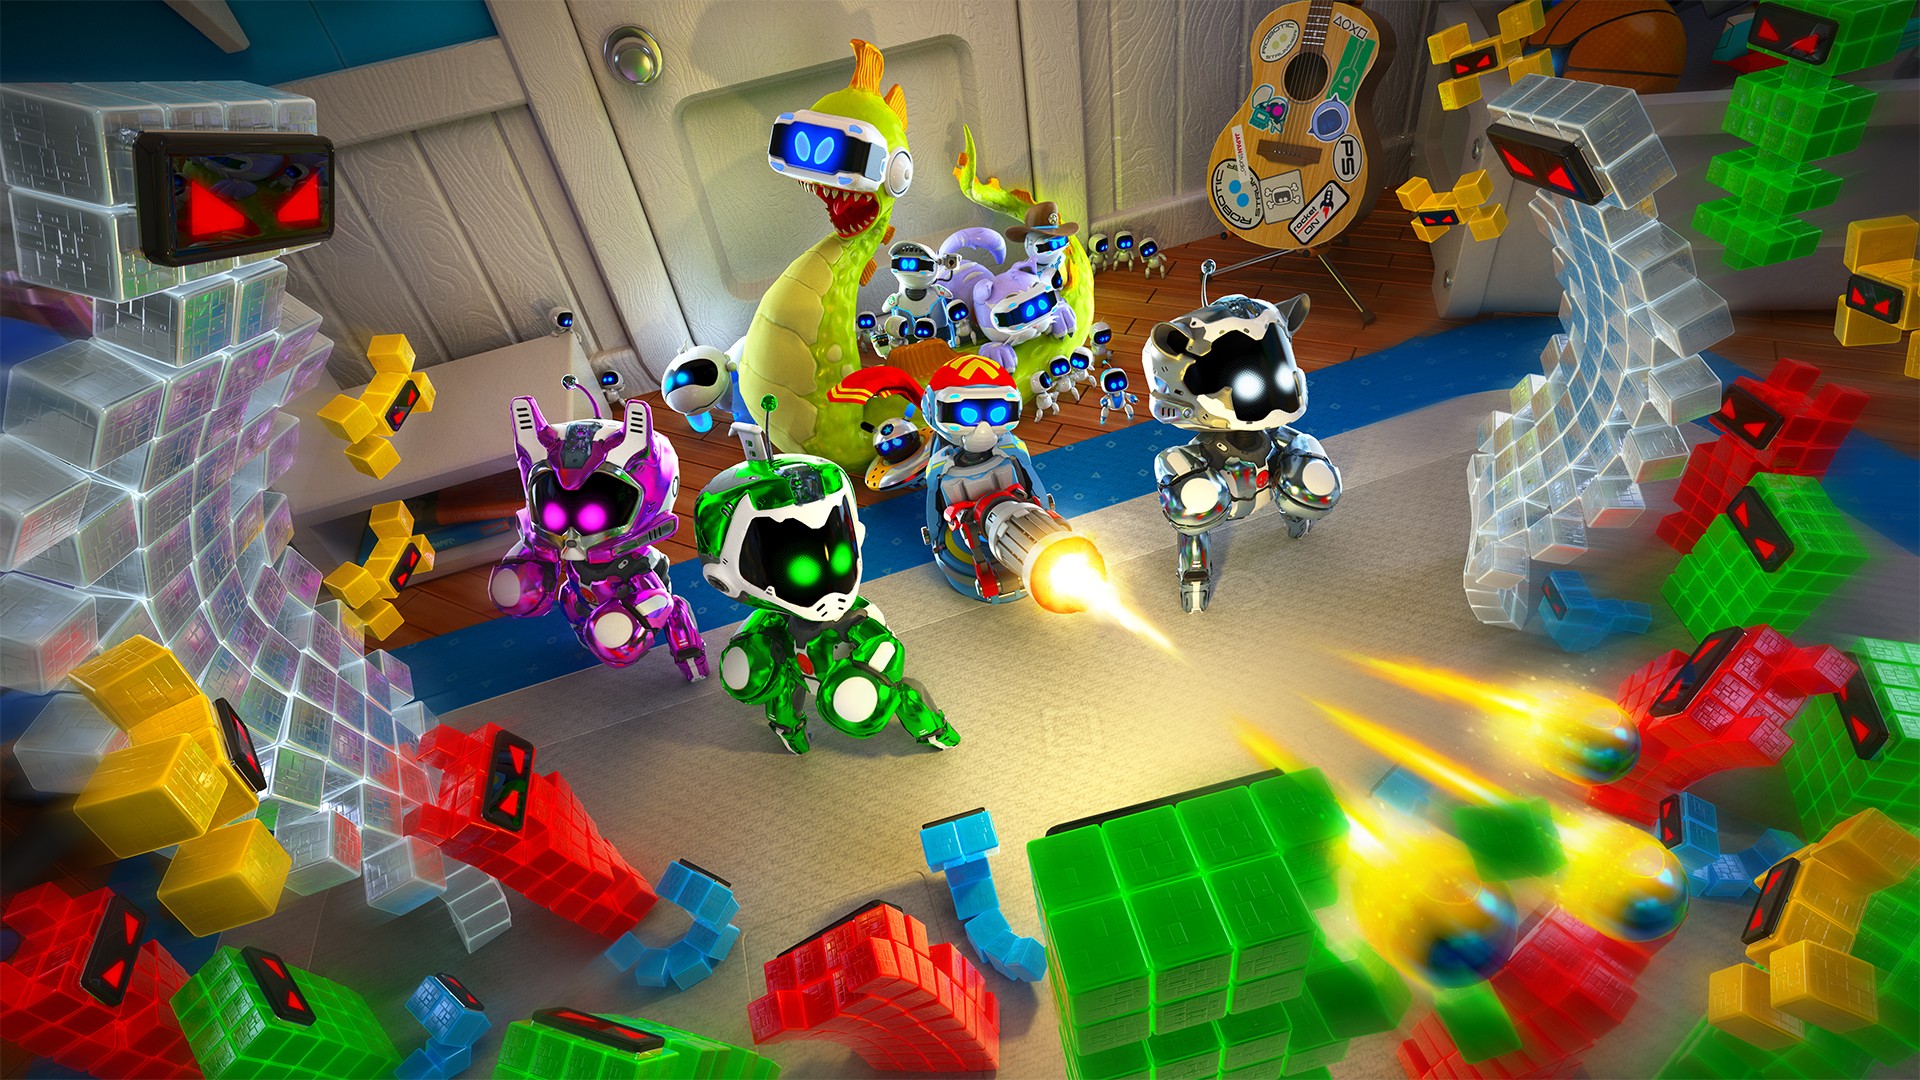 The Pick Me Up The Playroom Vr Is The Nearest Thing To Nintendo On Playstation